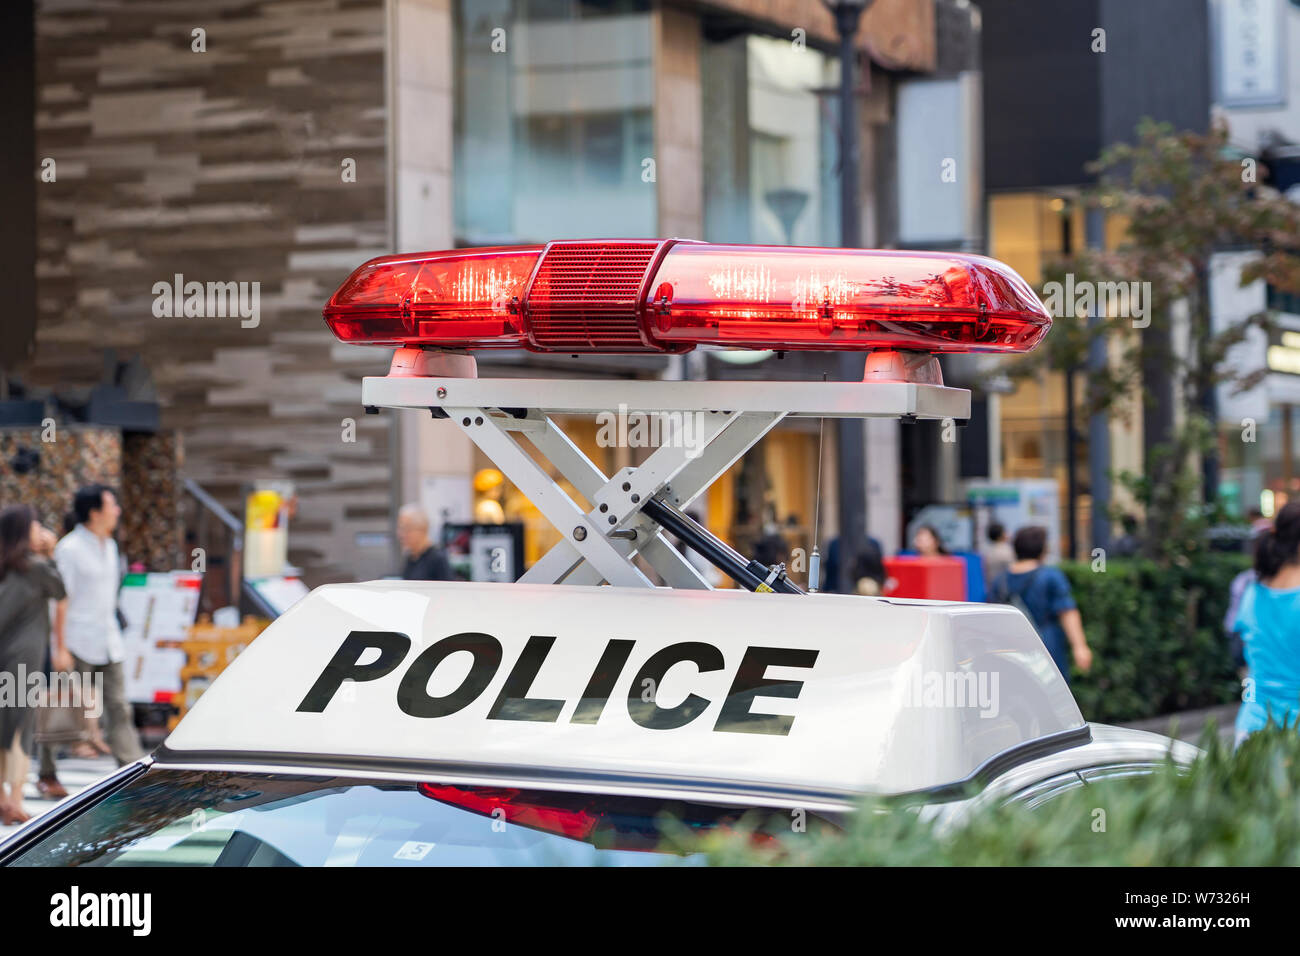 Closeup View Of Police Signal Light On A Police Patrol Car. Stock Photo